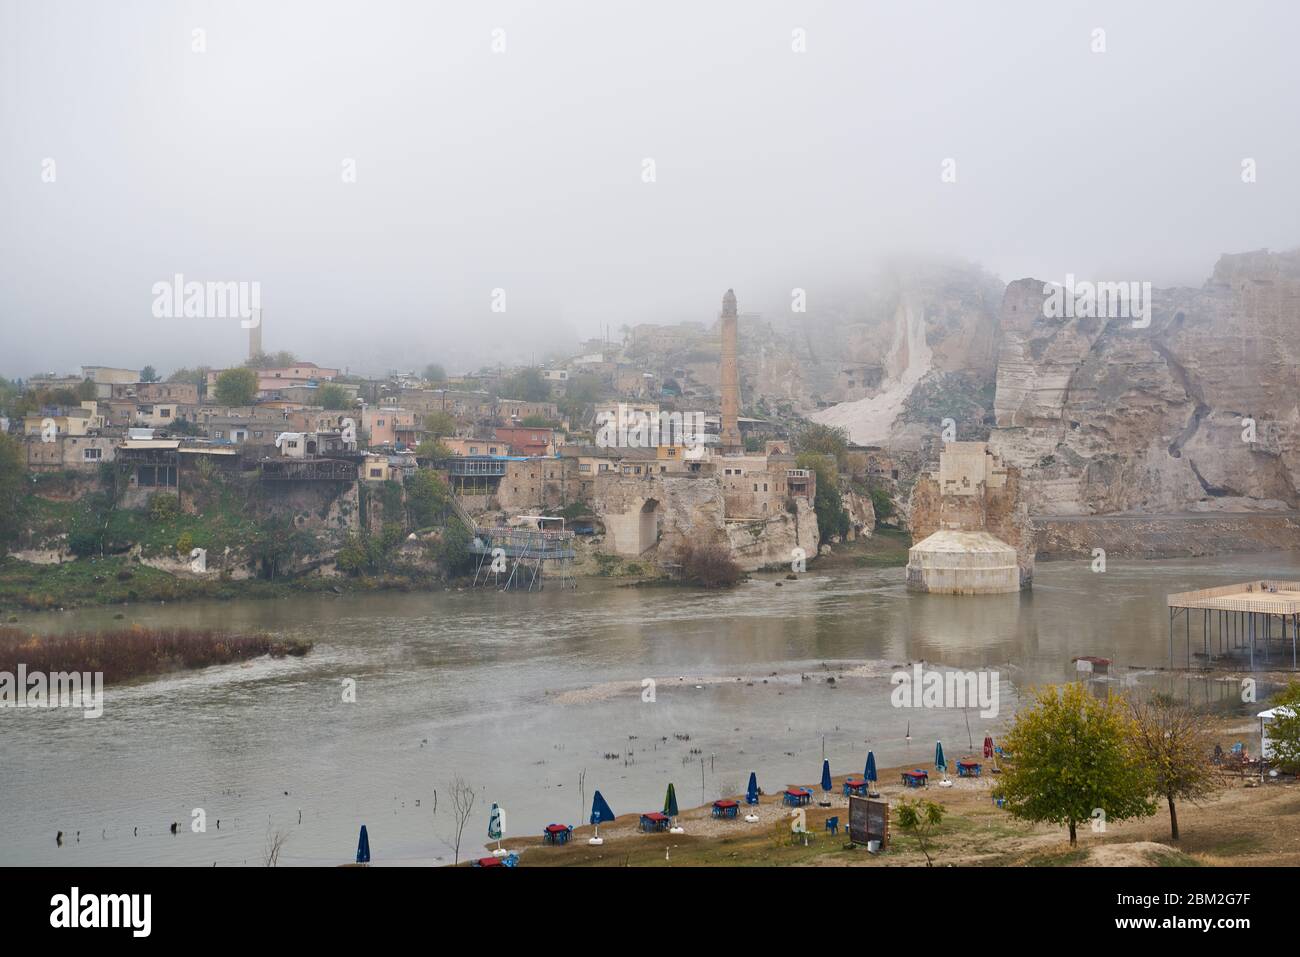 Panorama of Hasankeyf before collapsing under waters of dam. Old city located along Tigris River, Batman, Turkey. Stock Photo